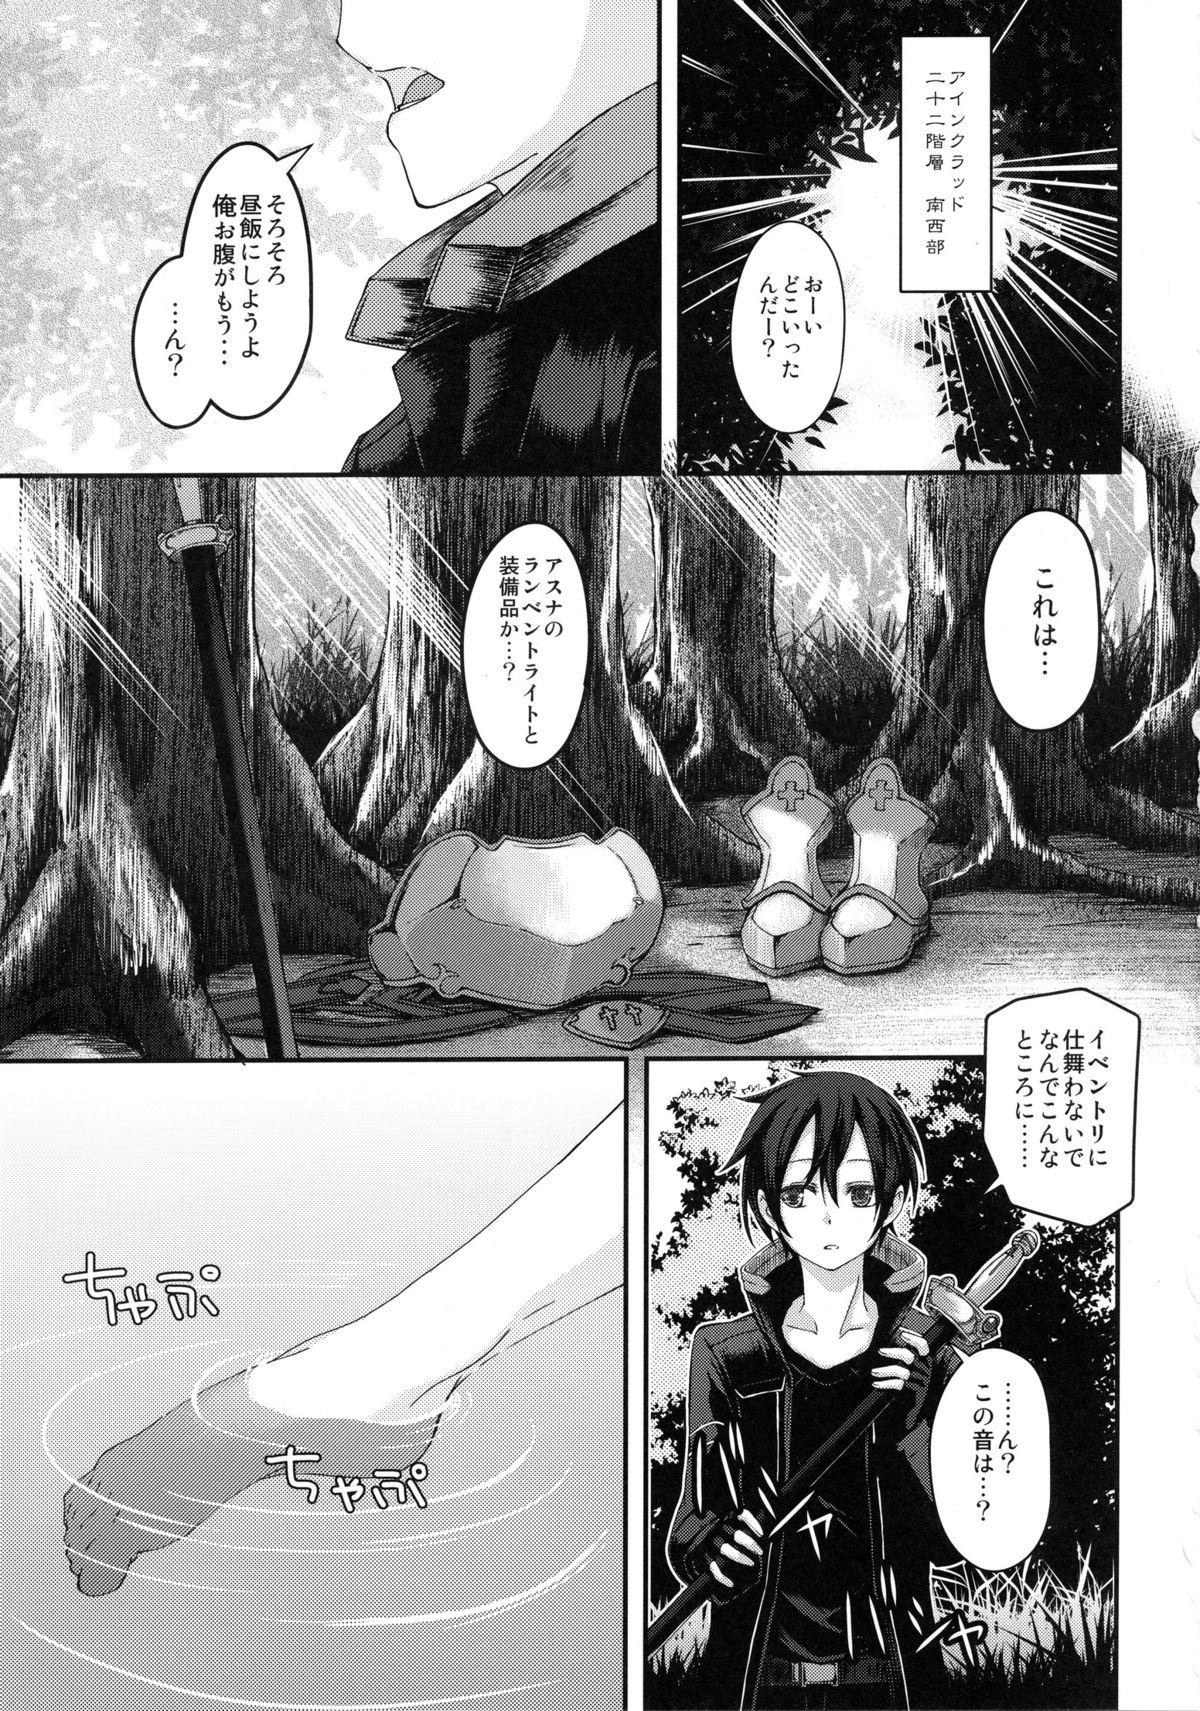 Spandex Marriage Experience - Sword art online Coroa - Page 2